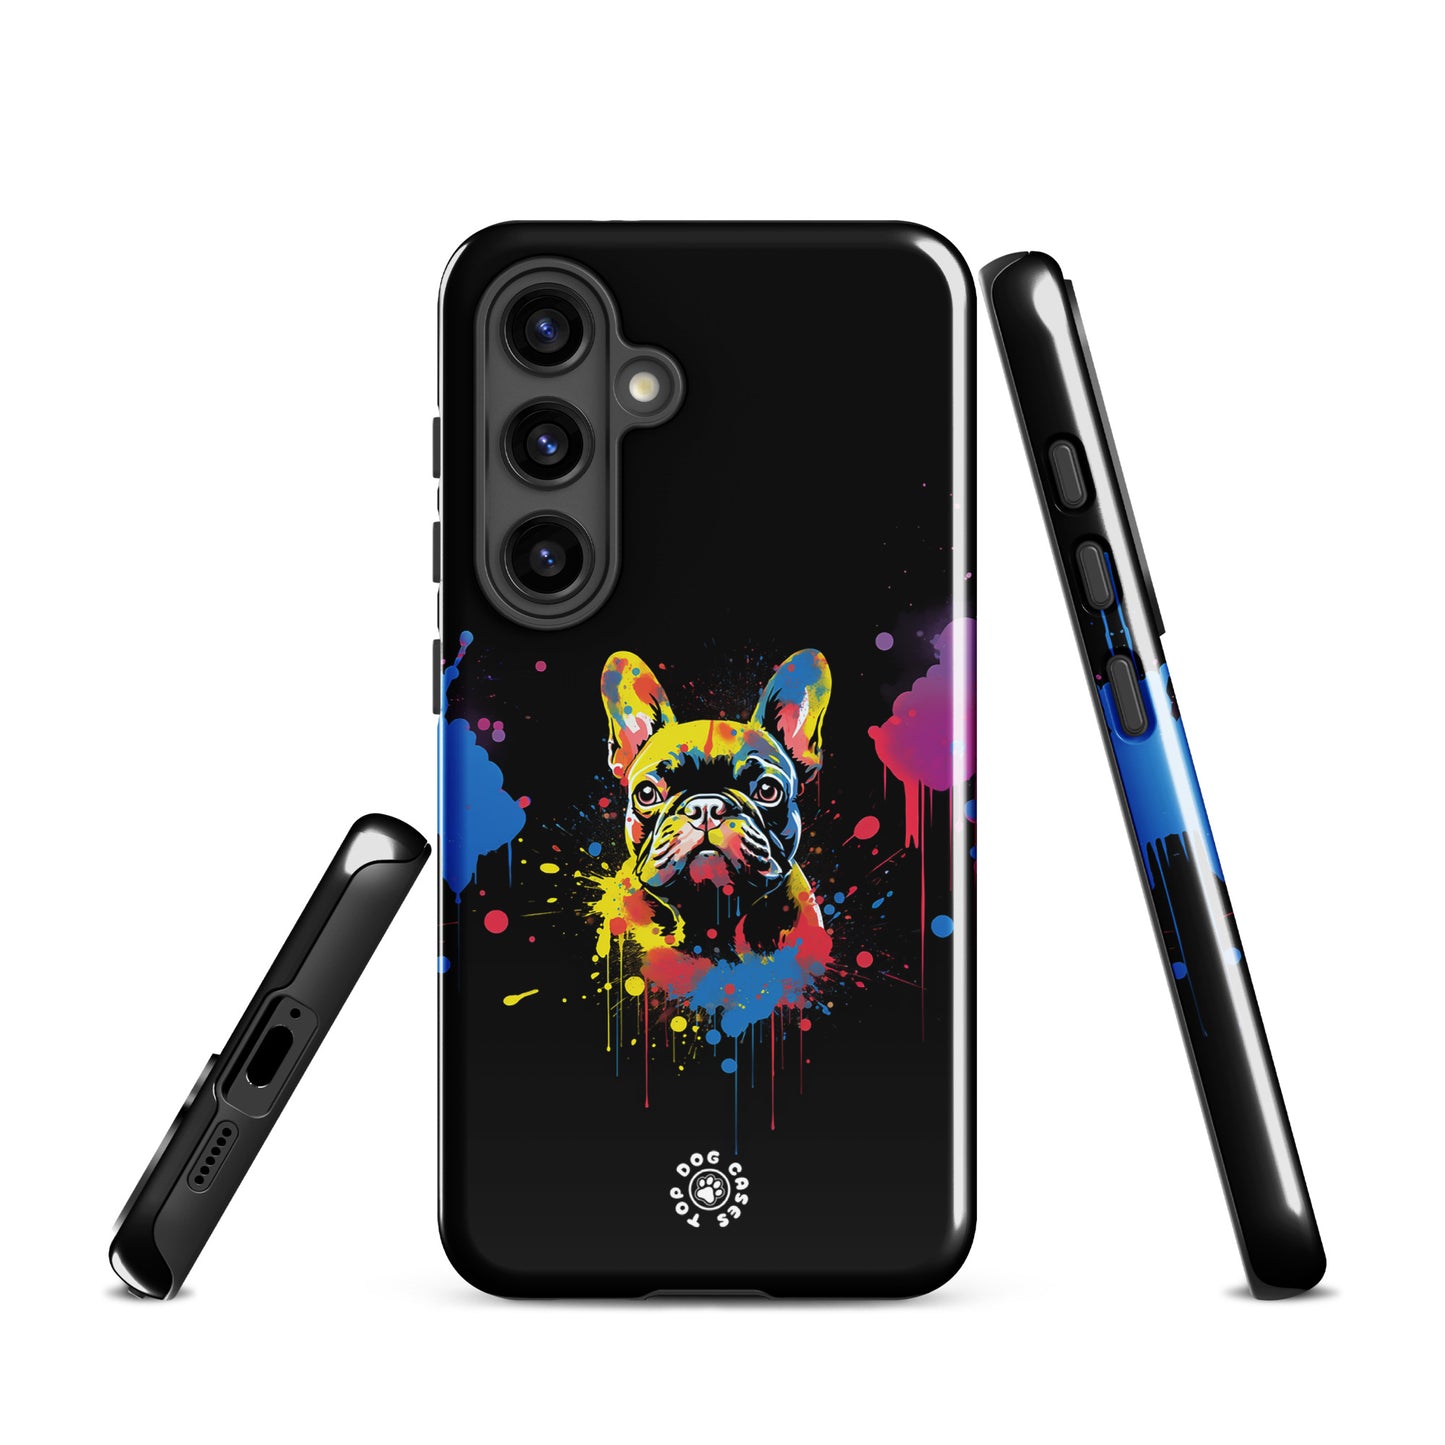 French Bulldog - Colorful Phone Case - Samsung - Top Dog Cases - #ColorfulPhoneCases, #DogPhoneCase, #dogs, #French Bulldog, #FrenchBulldog, #Samsung, #SamsungGalaxy, #SamsungGalaxyCase, #SamsungGalaxyS10, #SamsungGalaxyS20, #SamsungGalaxyS21, #SamsungGalaxyS22, #SamsungGalaxyS22Ultra, #SamsungGalaxyS23, #SamsungGalaxyS23Plus, #SamsungGalaxyS23Ultra, #SamsungPhoneCase, #ToughCase, SamsungGalaxyS20Plus, SamsungGalaxyS22Plus, SamsungGalaxyS24, SamsungGalaxyS24plus, SamsungGalaxyS24Ultra